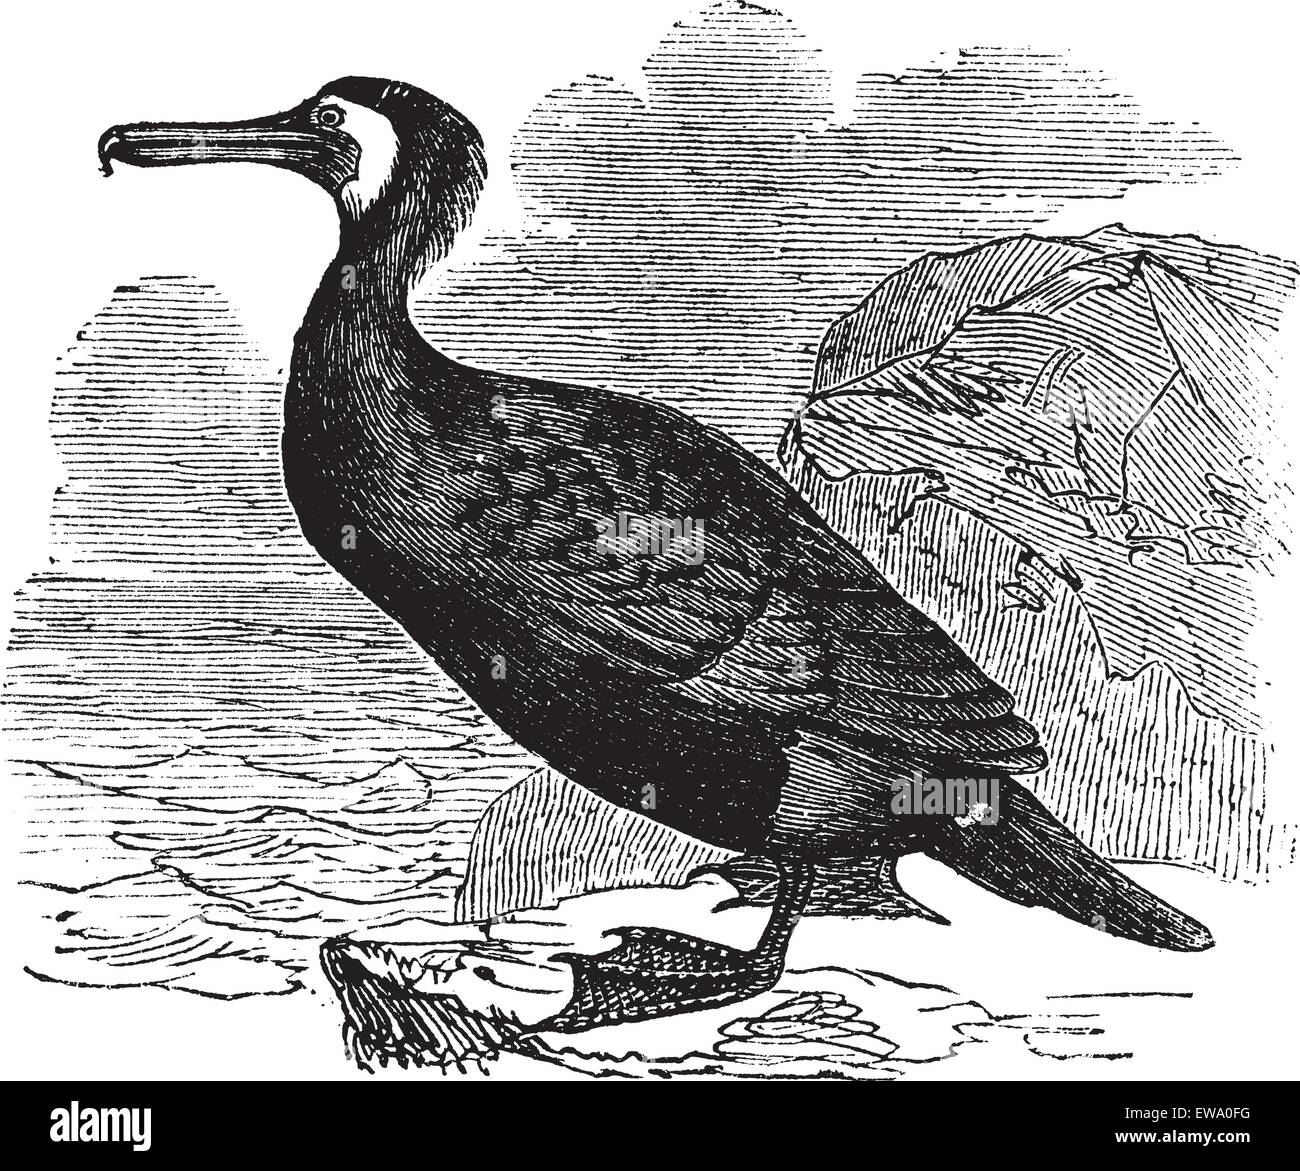 Great Cormorant or Great Black Cormorant or Black Cormorant or Black Shag or Phalacrocorax carbo, vintage engraving. Old engraved illustration of a Great Cormorant. Stock Vector